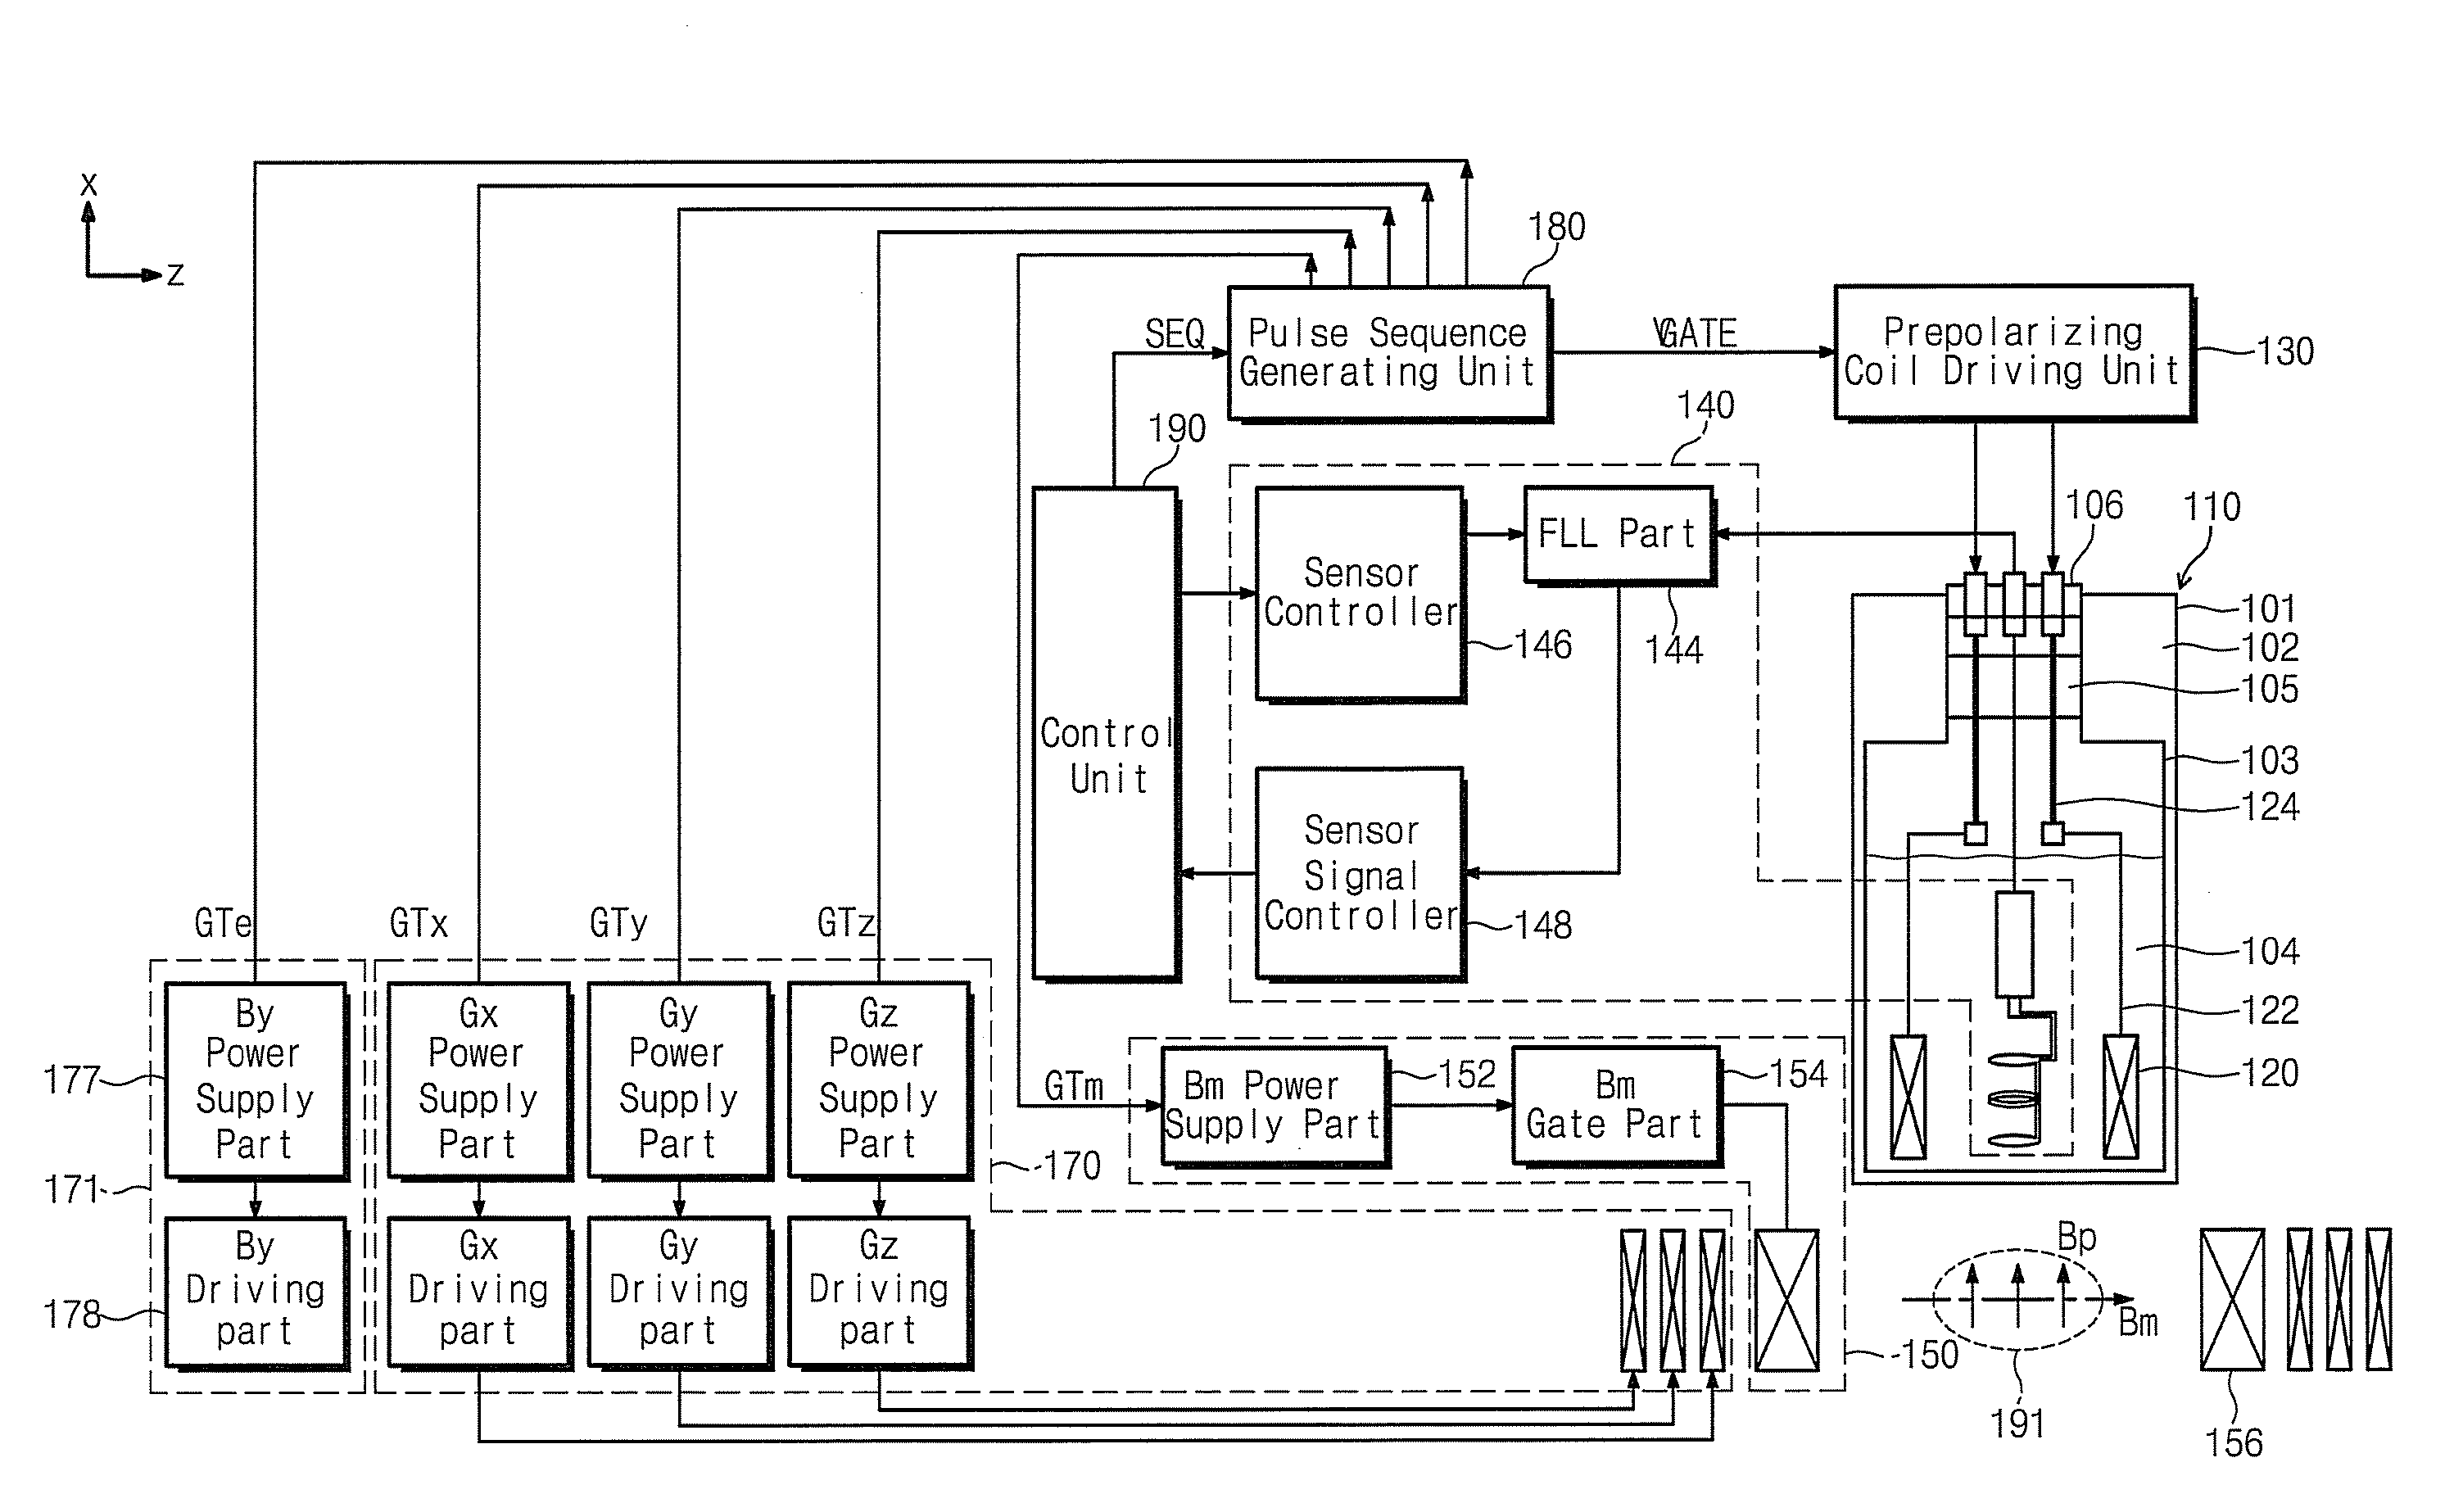 Nuclear magnetic resonance apparatus